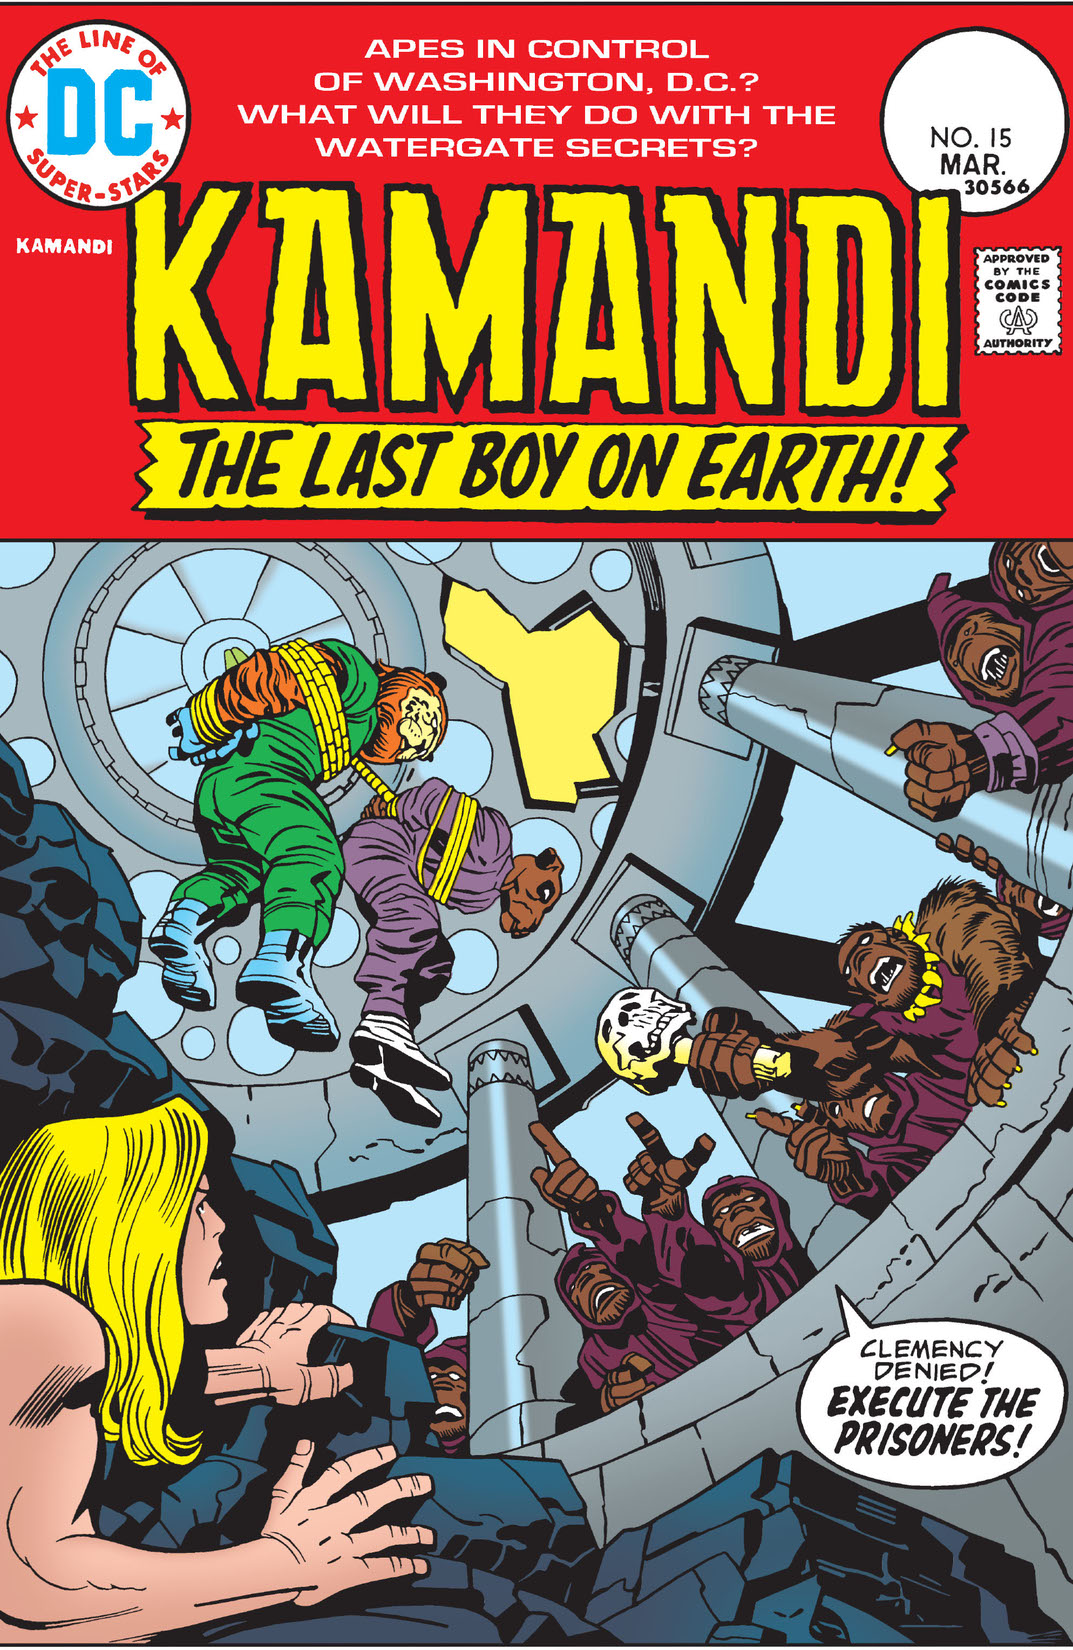 Kamandi: The Last Boy on Earth #15 preview images